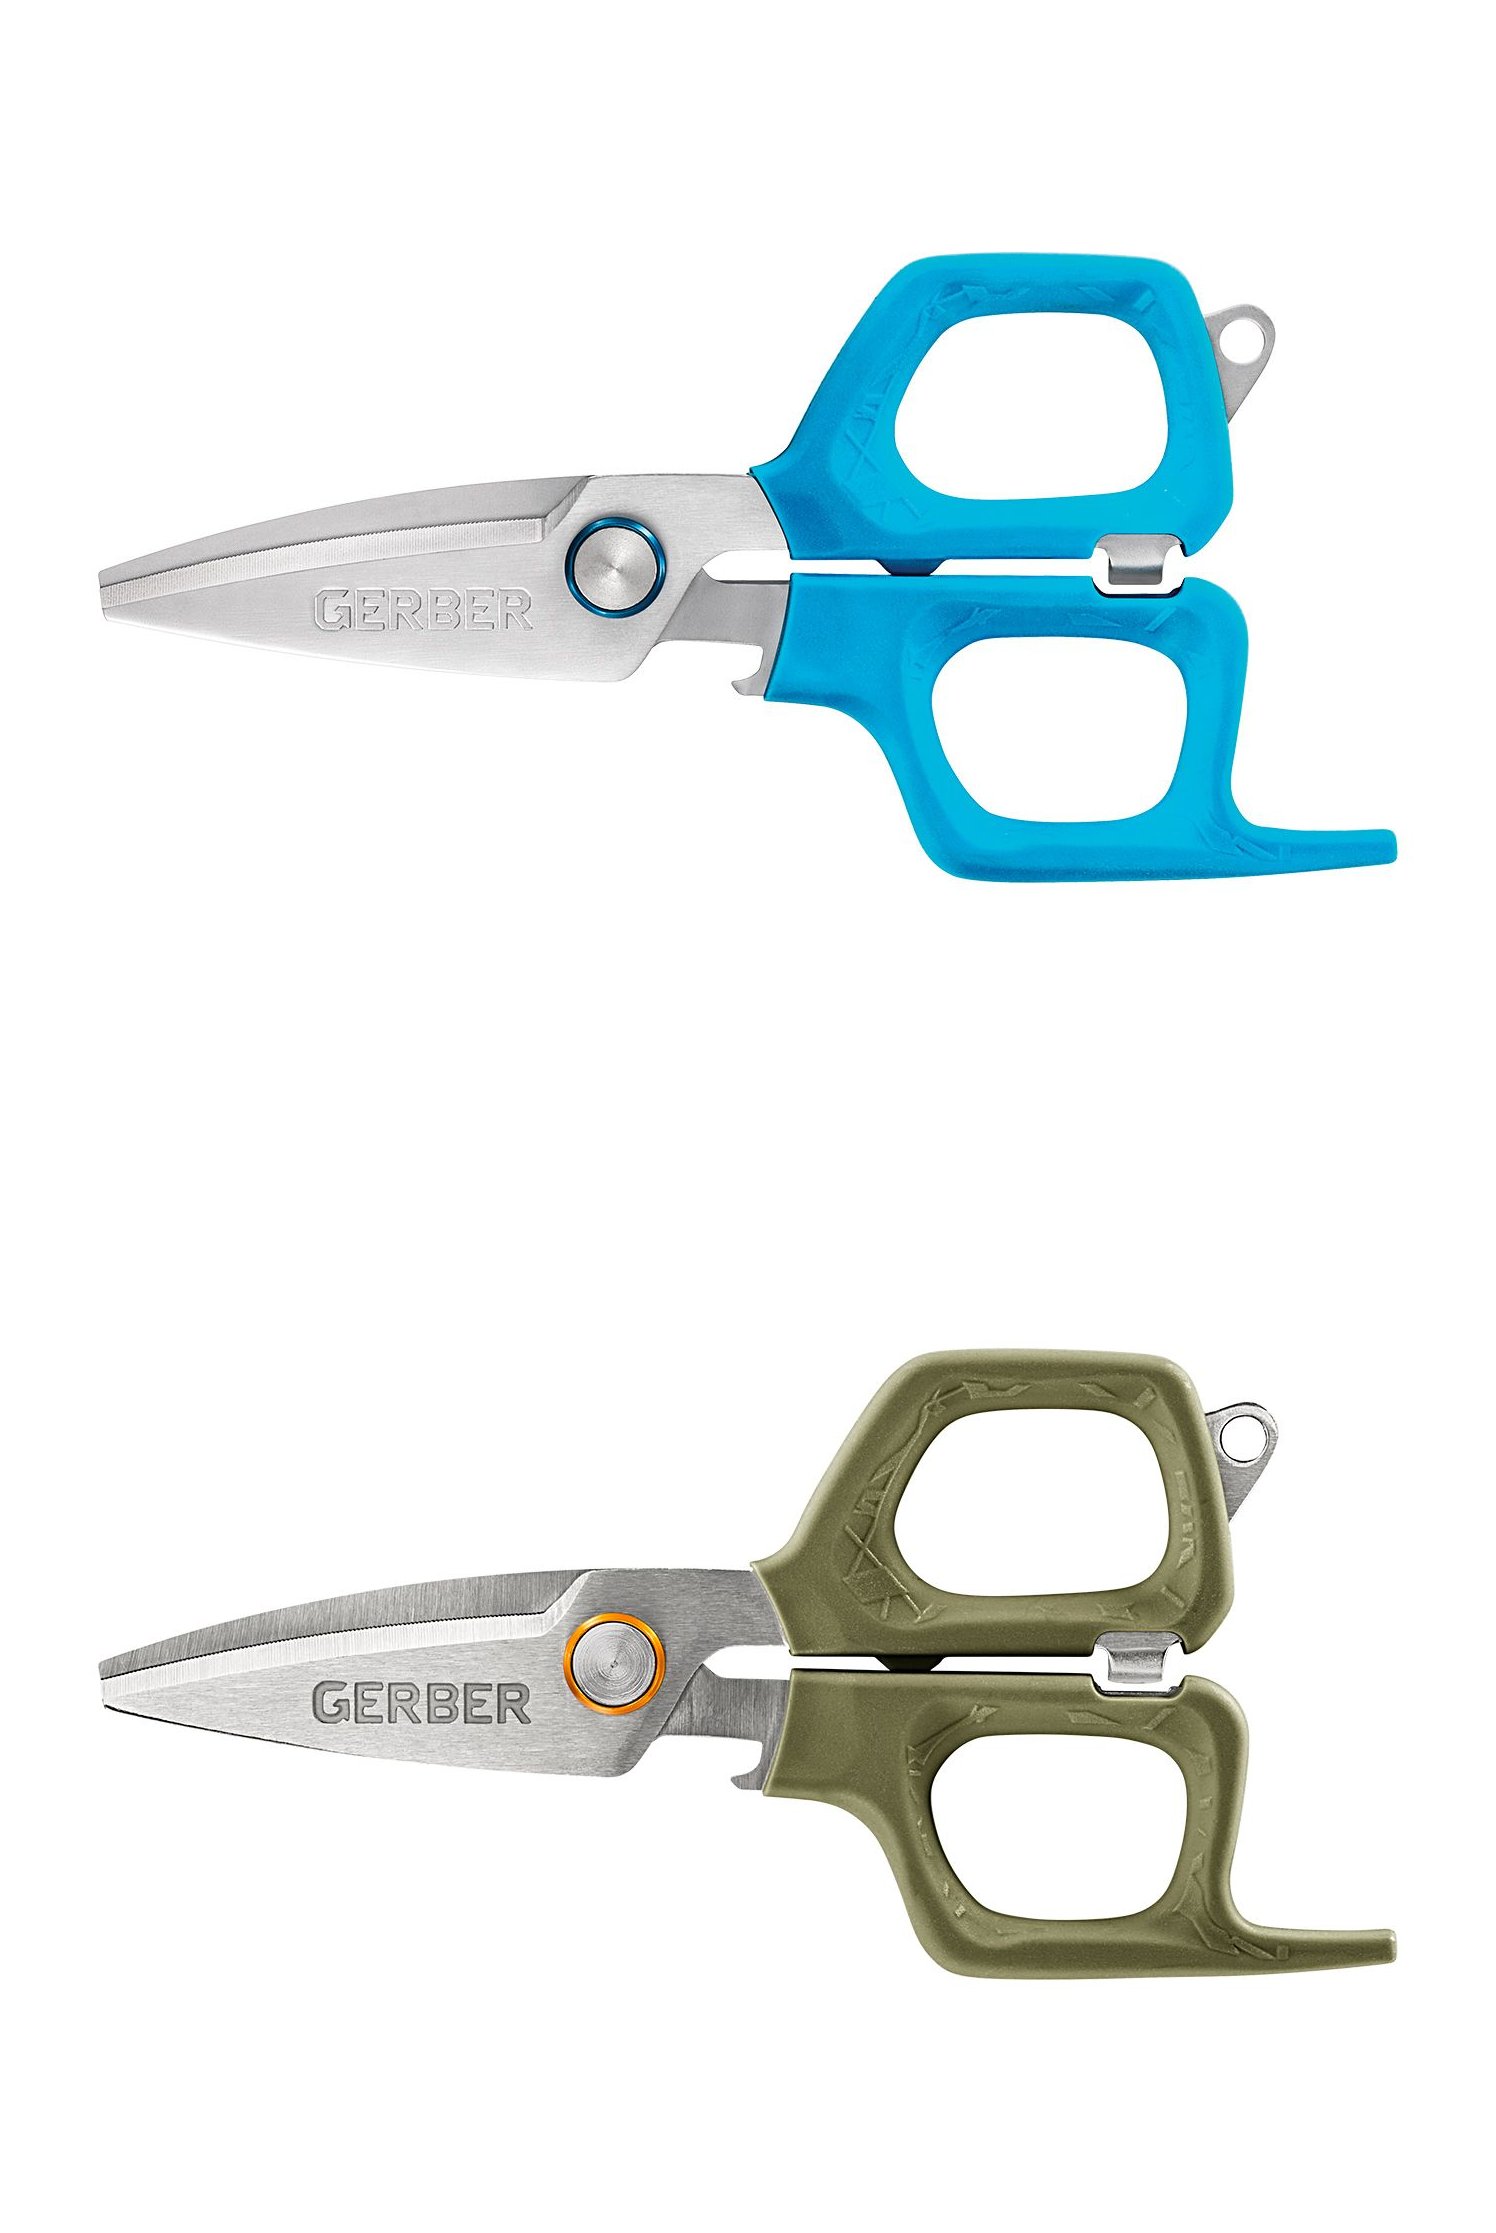 Gerber Neat Freak Fishing Scissors  10% Off 5 Star Rating Free Shipping  over $49!